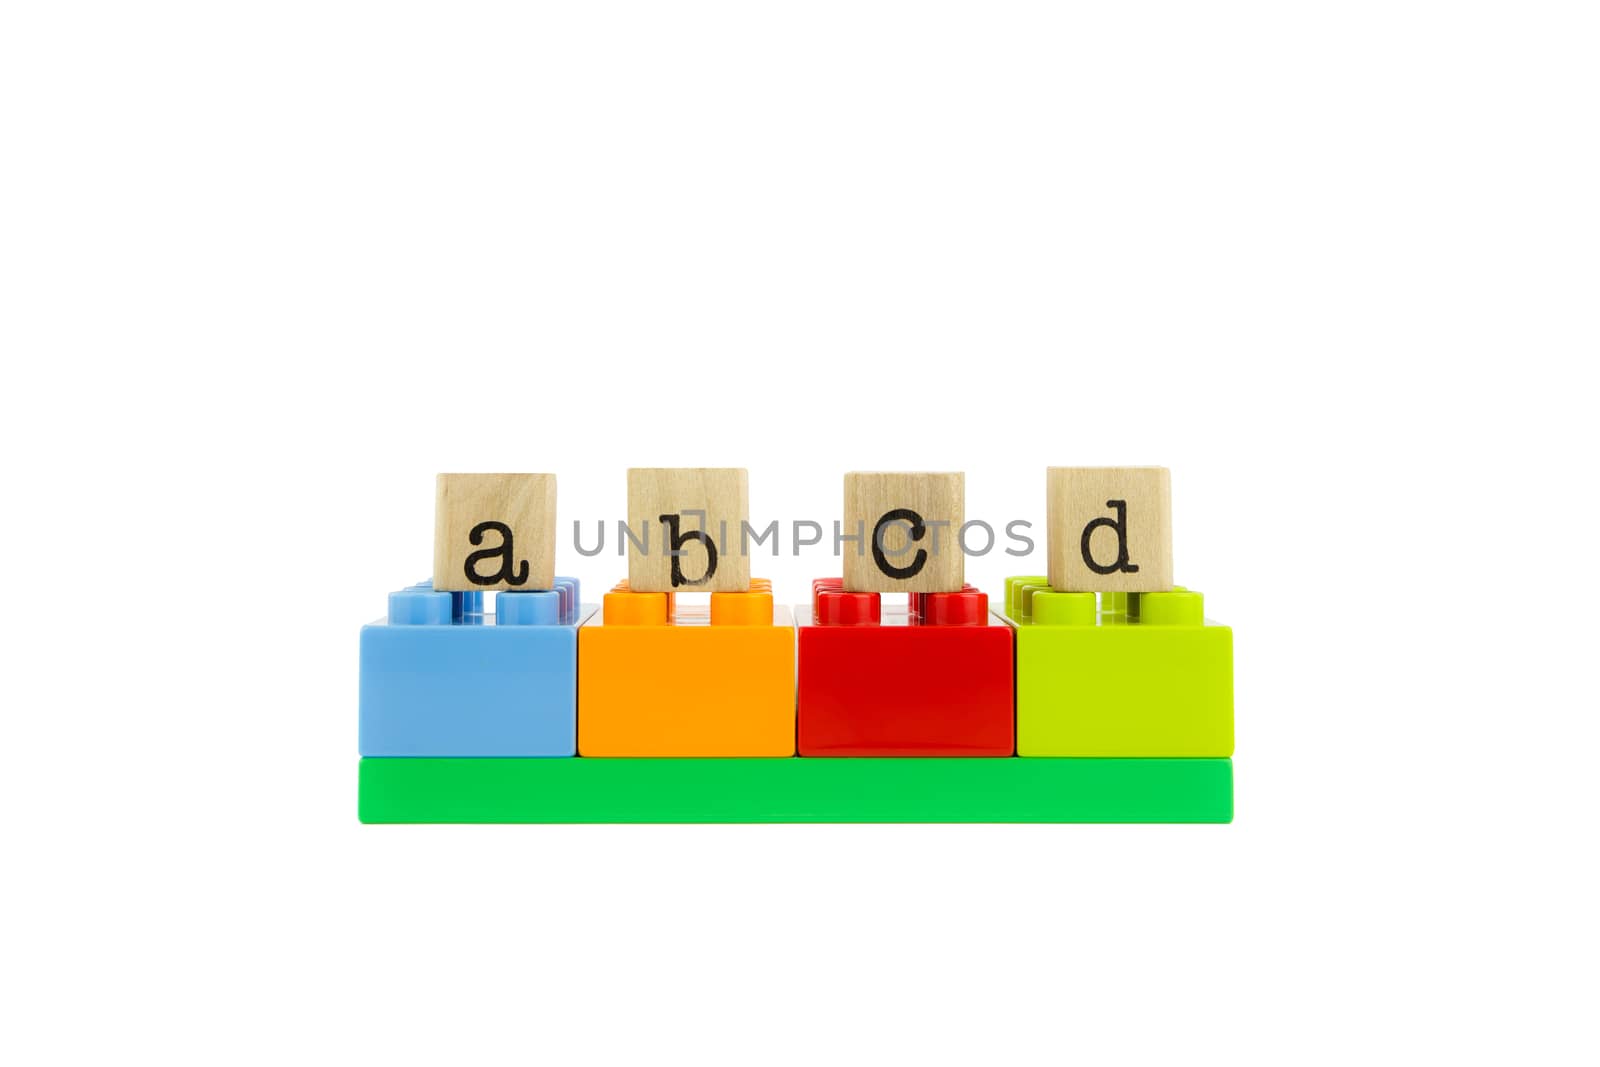 abcd word on wood stamps stack on colorful toy blocks, playing and learning language concepts